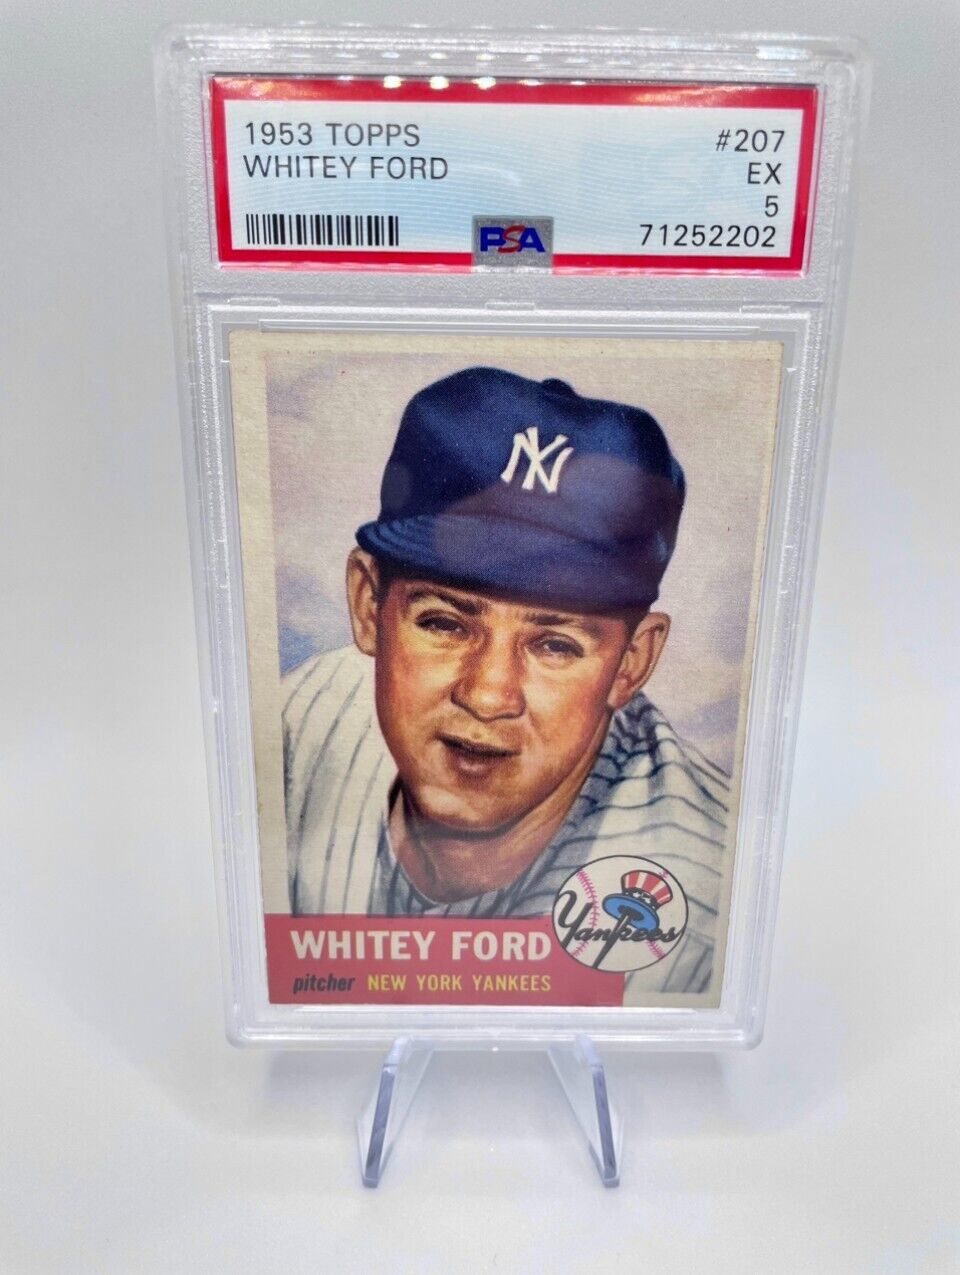 1953 Topps Whitey Ford #207 - Vintage Card - Excellent PSA 5